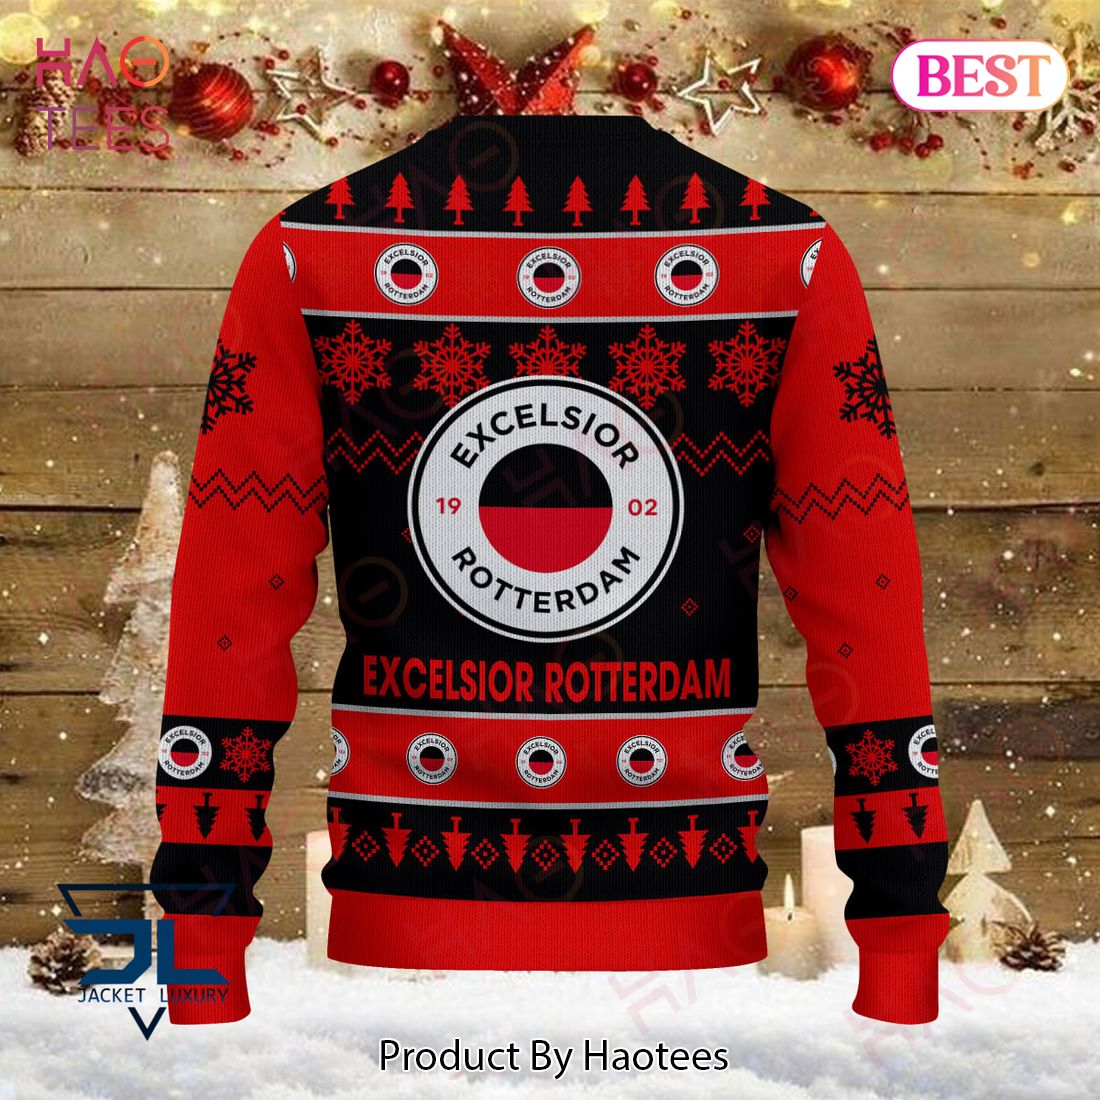 HOT Excelsior Rotterdam Red Mix Black Christmas Luxury Brand Sweater Limited Edition